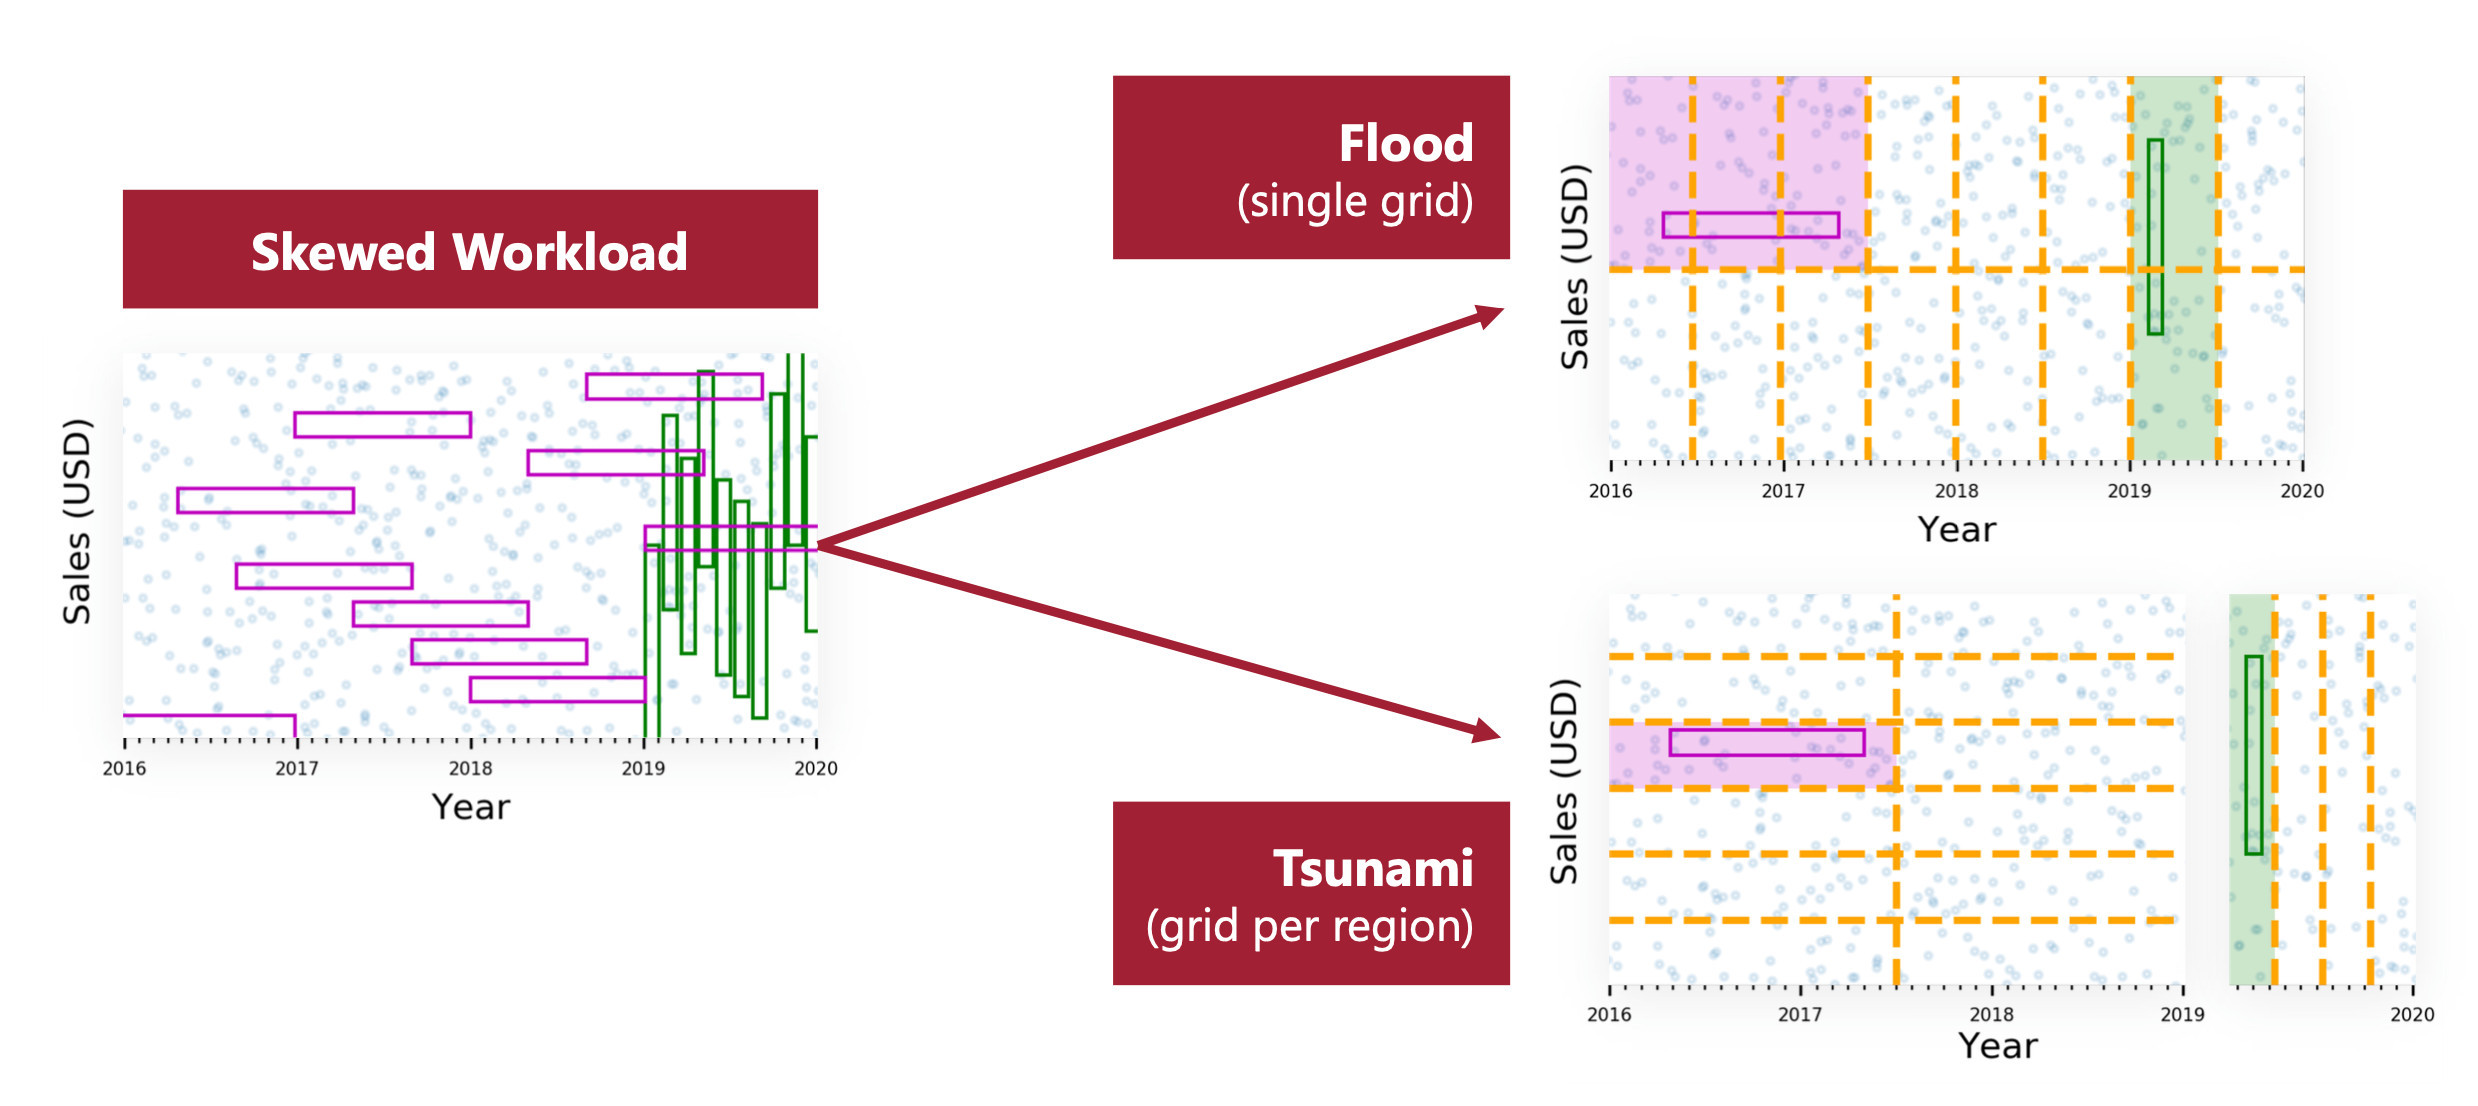 Visual representation of the single grid used by Flood and the grids per region used by Tsunami